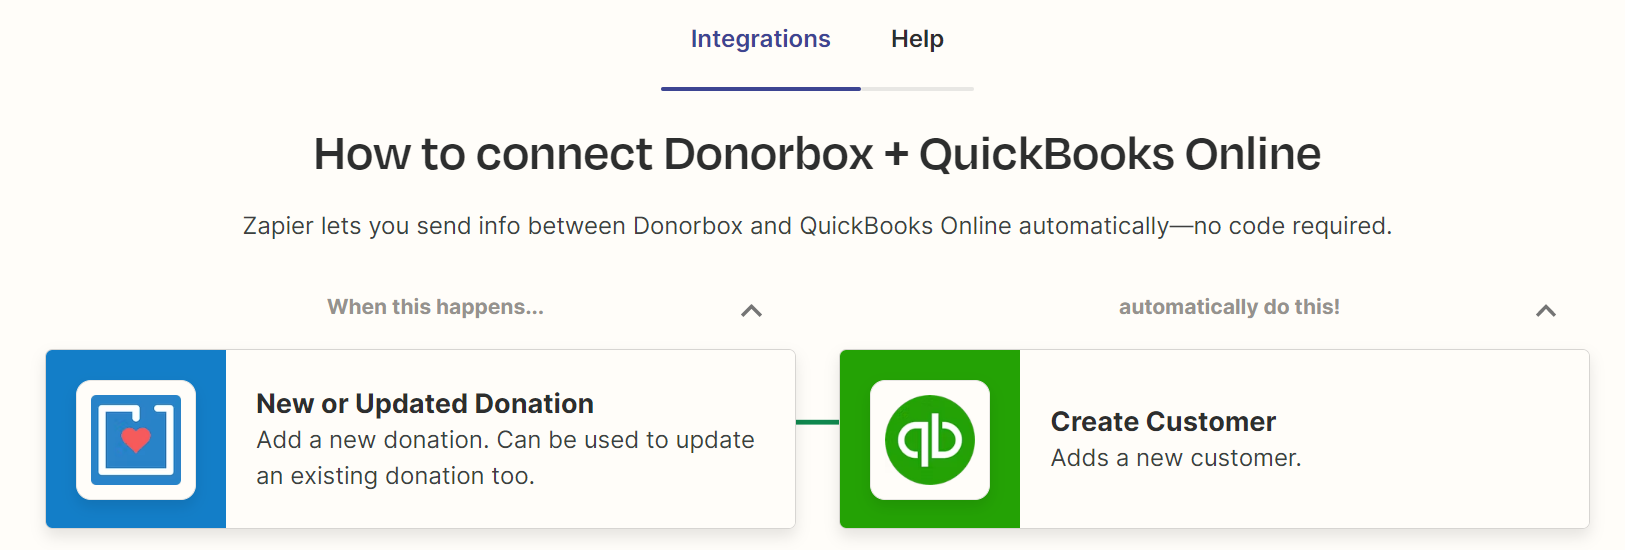 donorbox and quickbooks integration